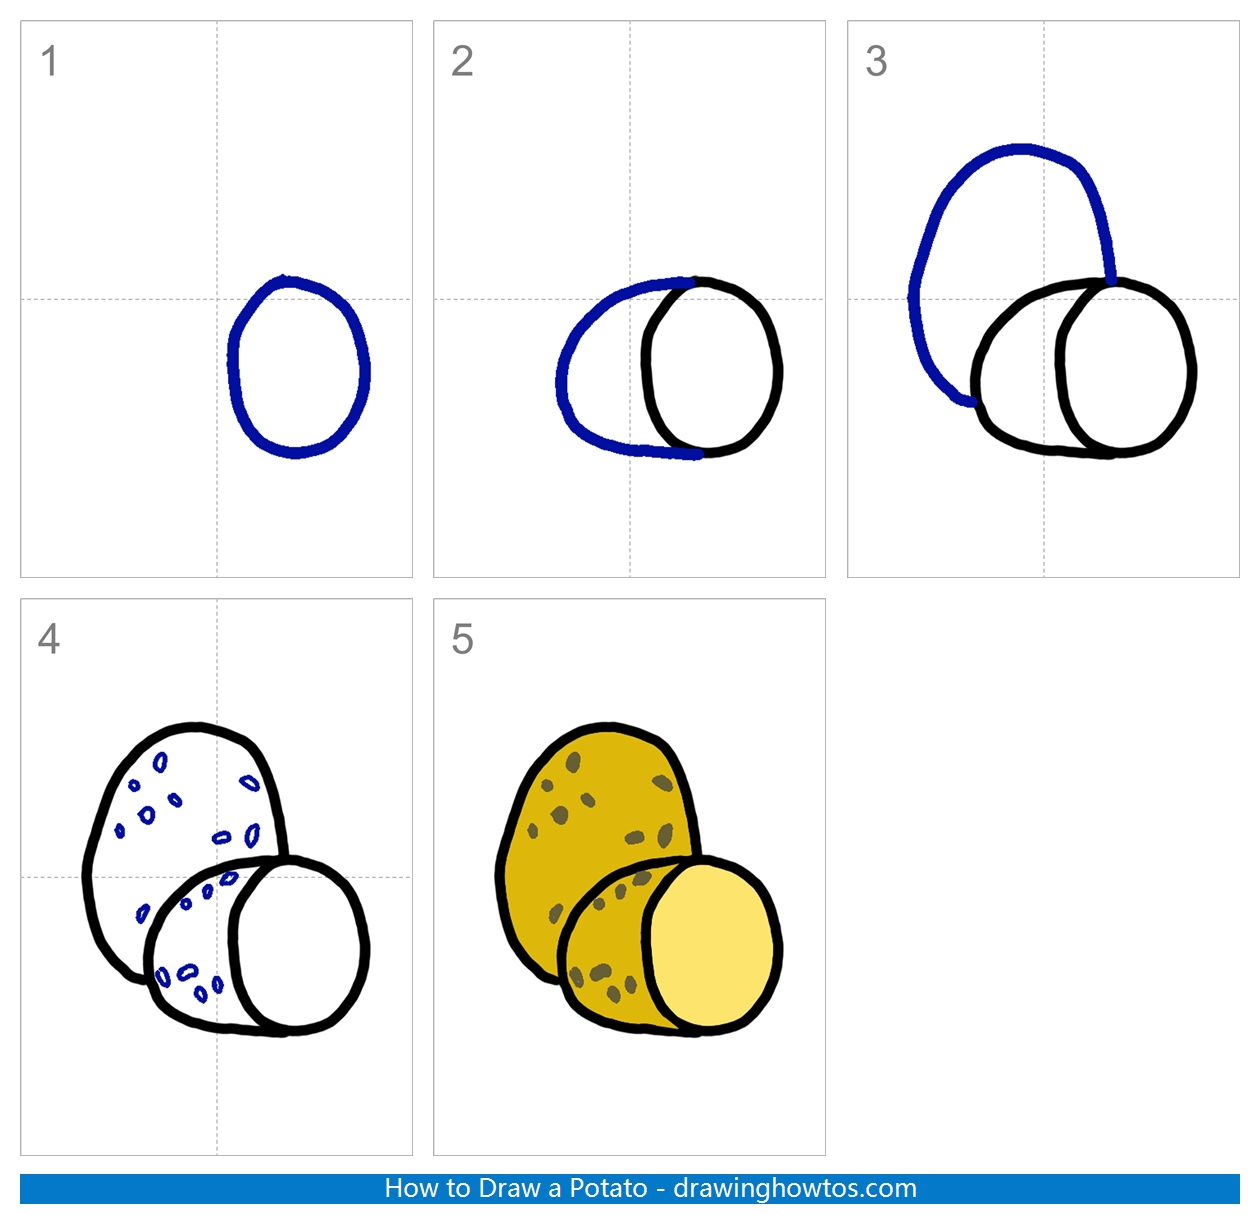 How to Draw a Potato Step by Step